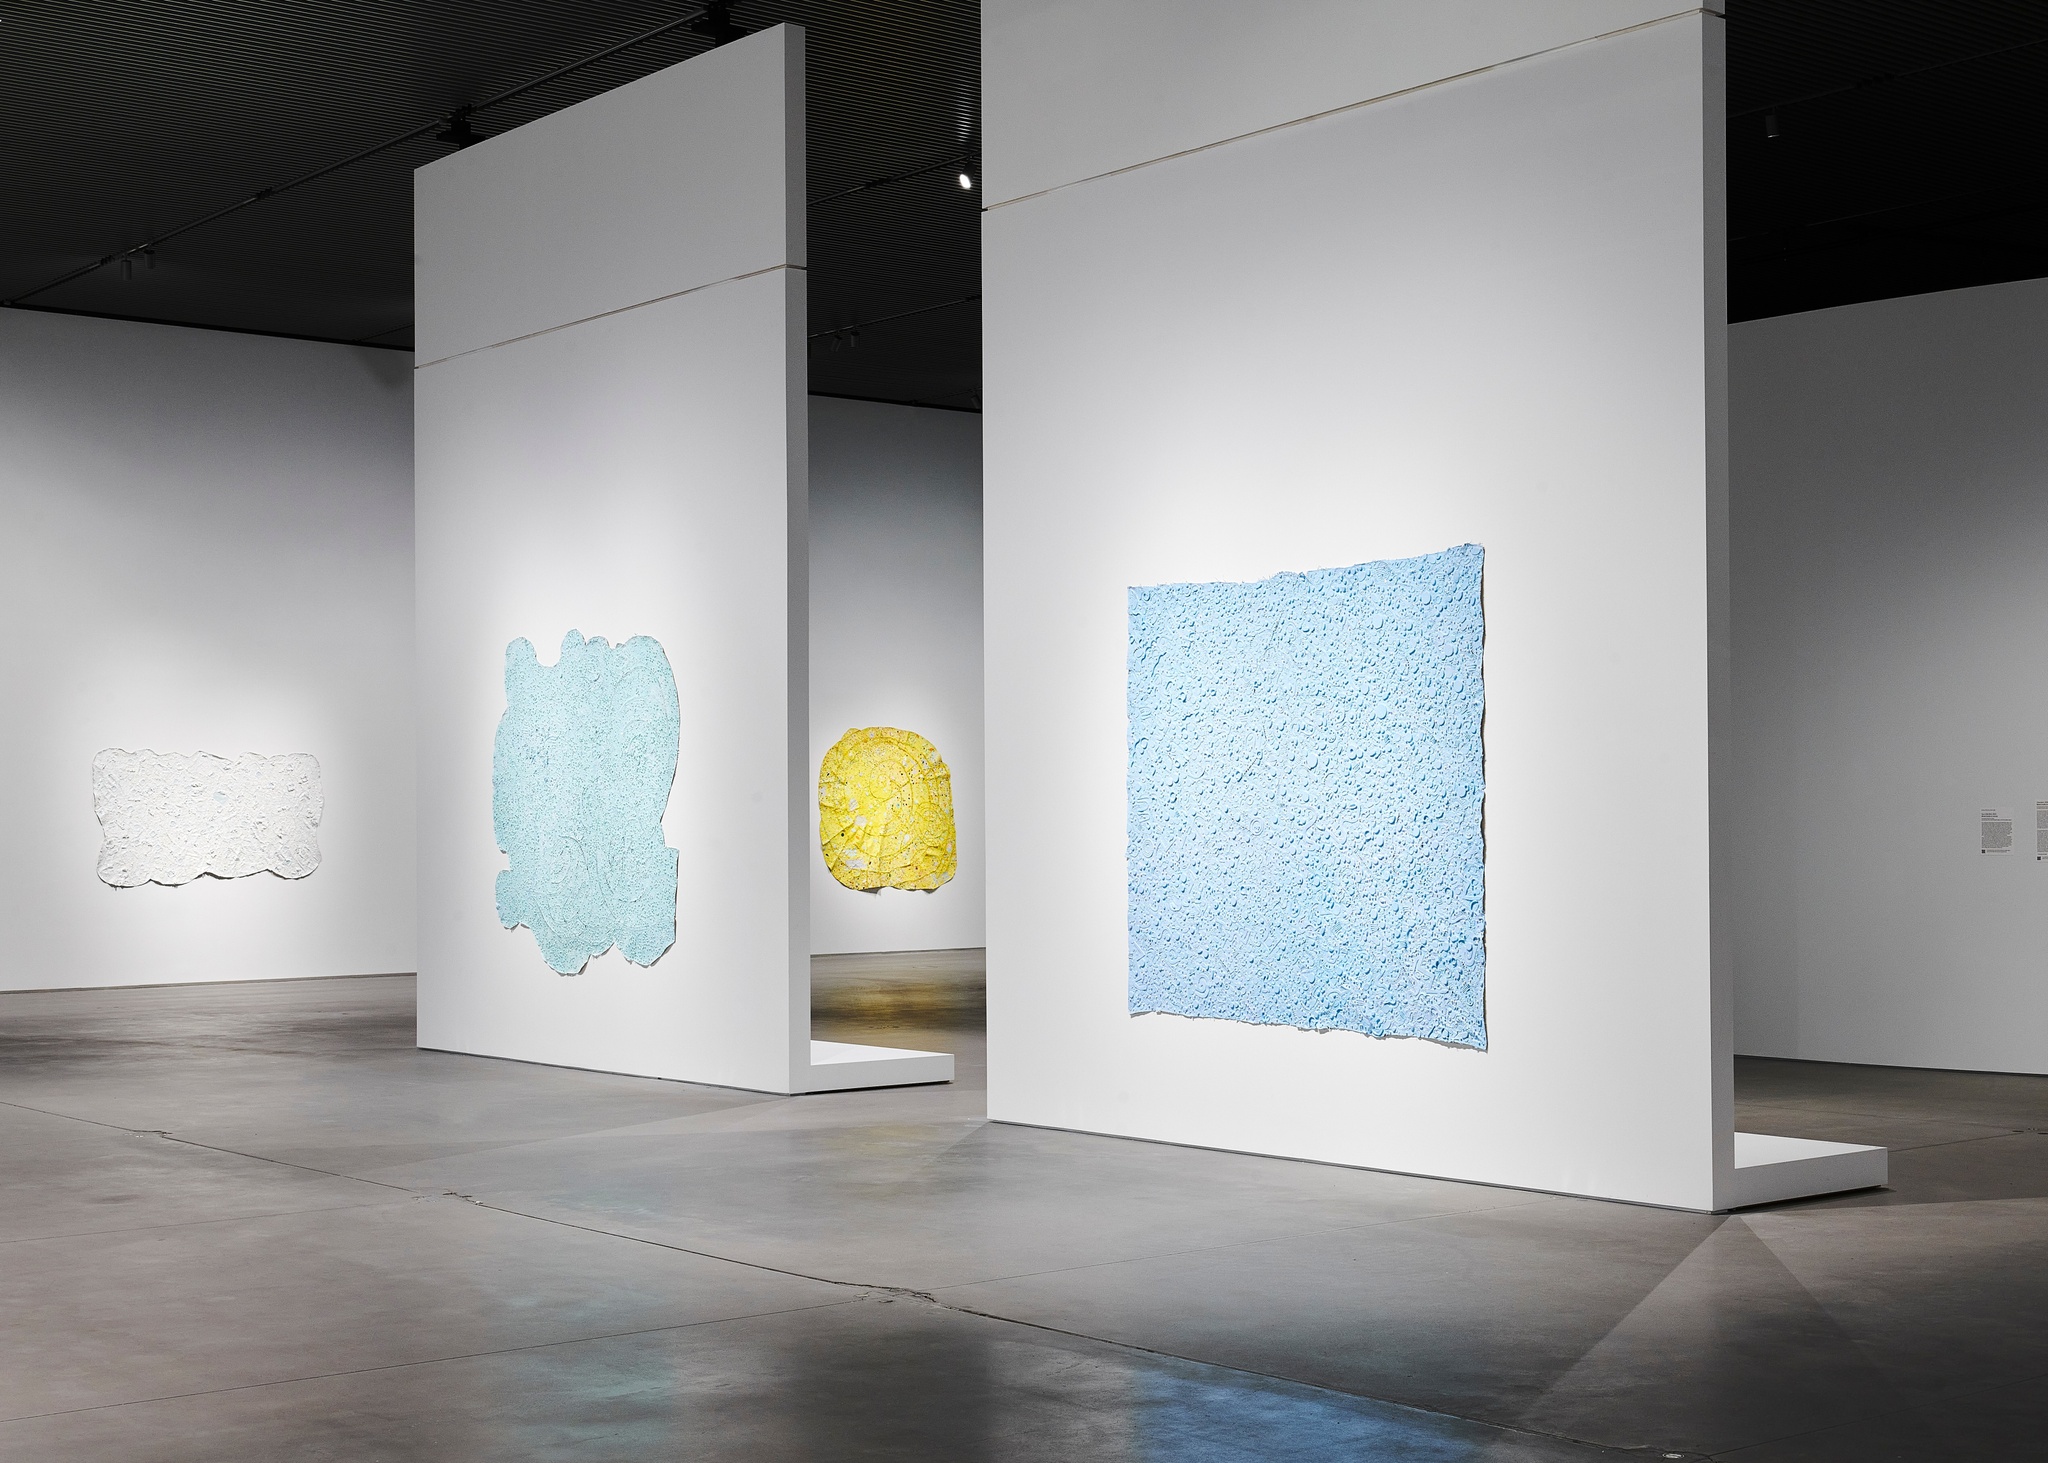 An installation view of abstract paintings in the exhibition Howardena Pindell: Rope/Fire/Water. Two blue and blue-green canvases are on adjacent walls with a curvilinear yellow canvas peeking through a gap in the walls.